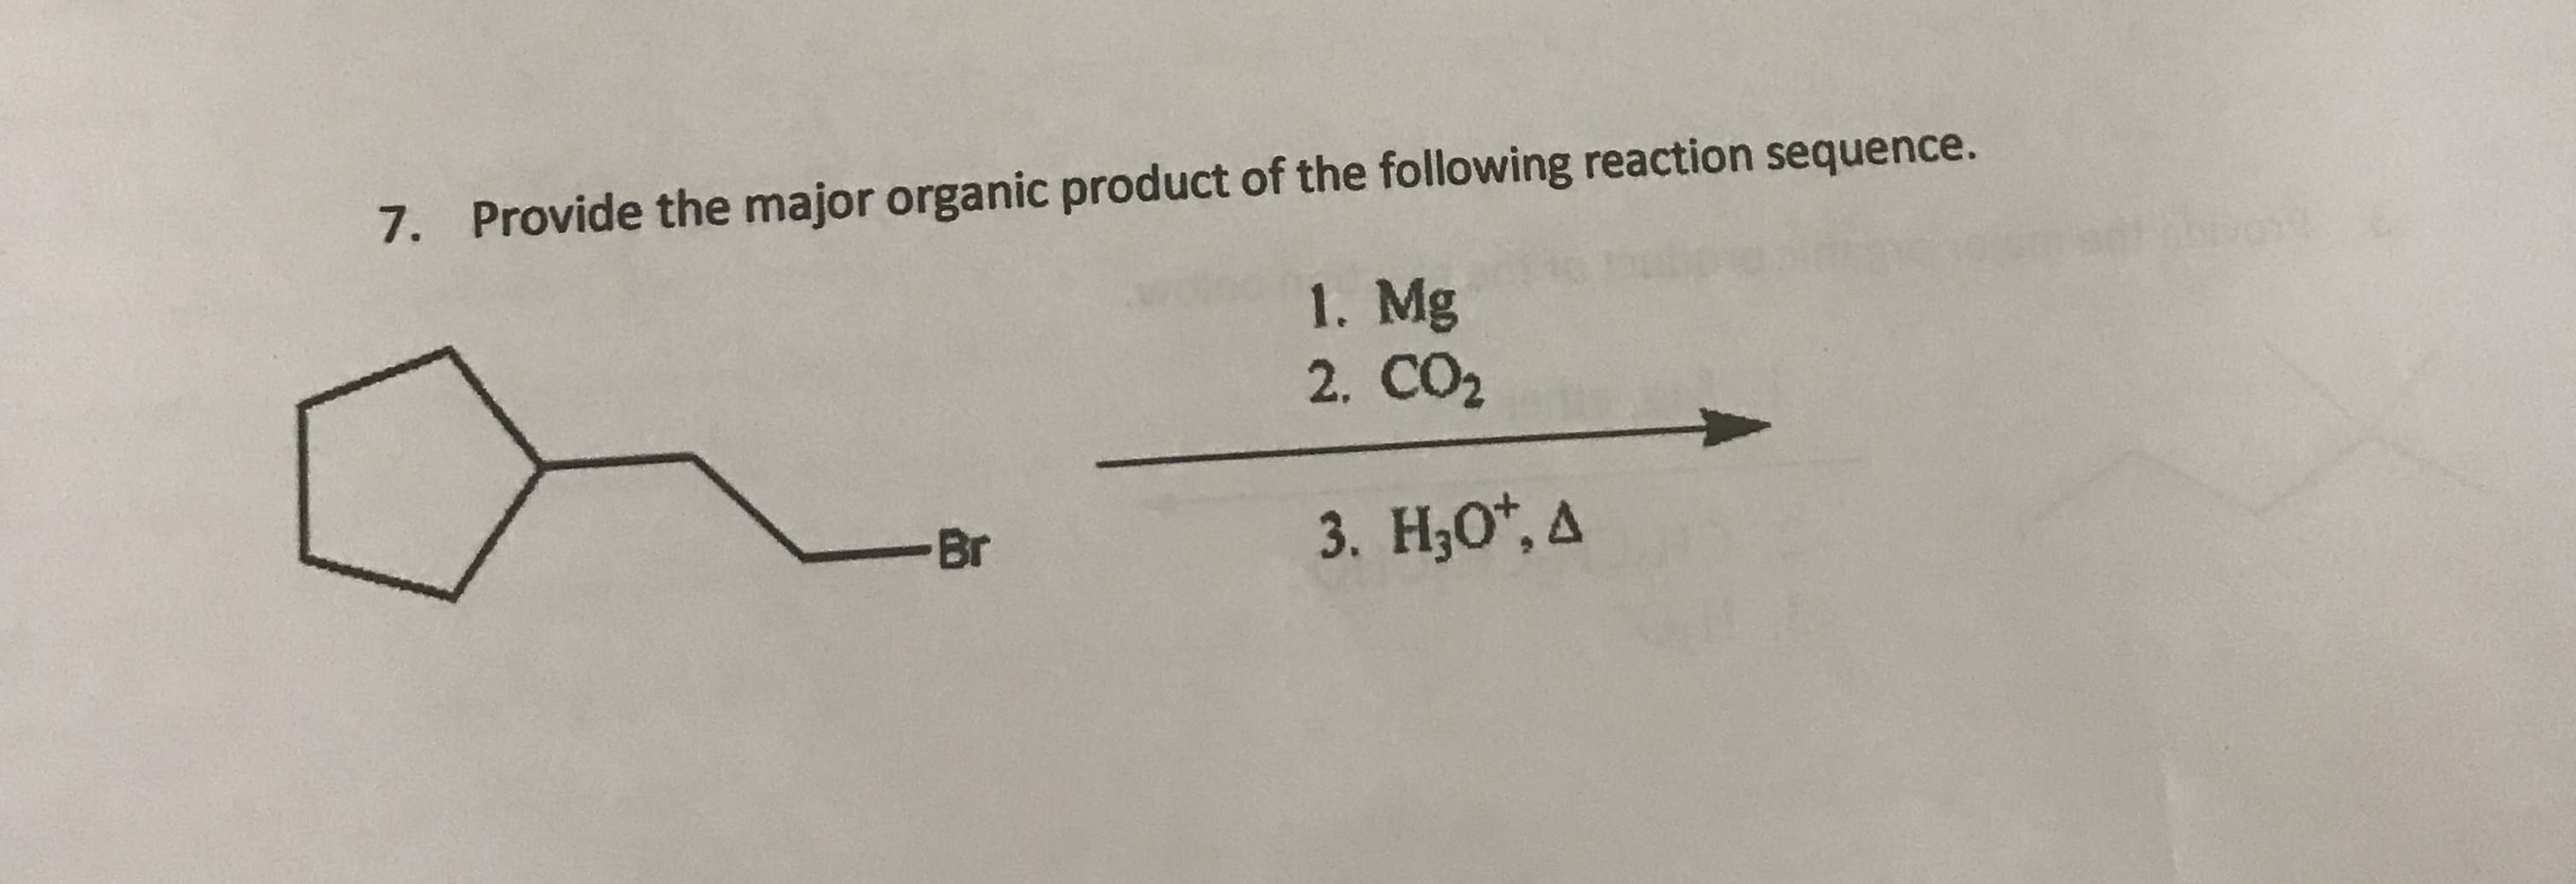 7. Provide the major organic product of the following reaction sequence.
1. Mg
2. CO2
3. H,0*, A
-Br
